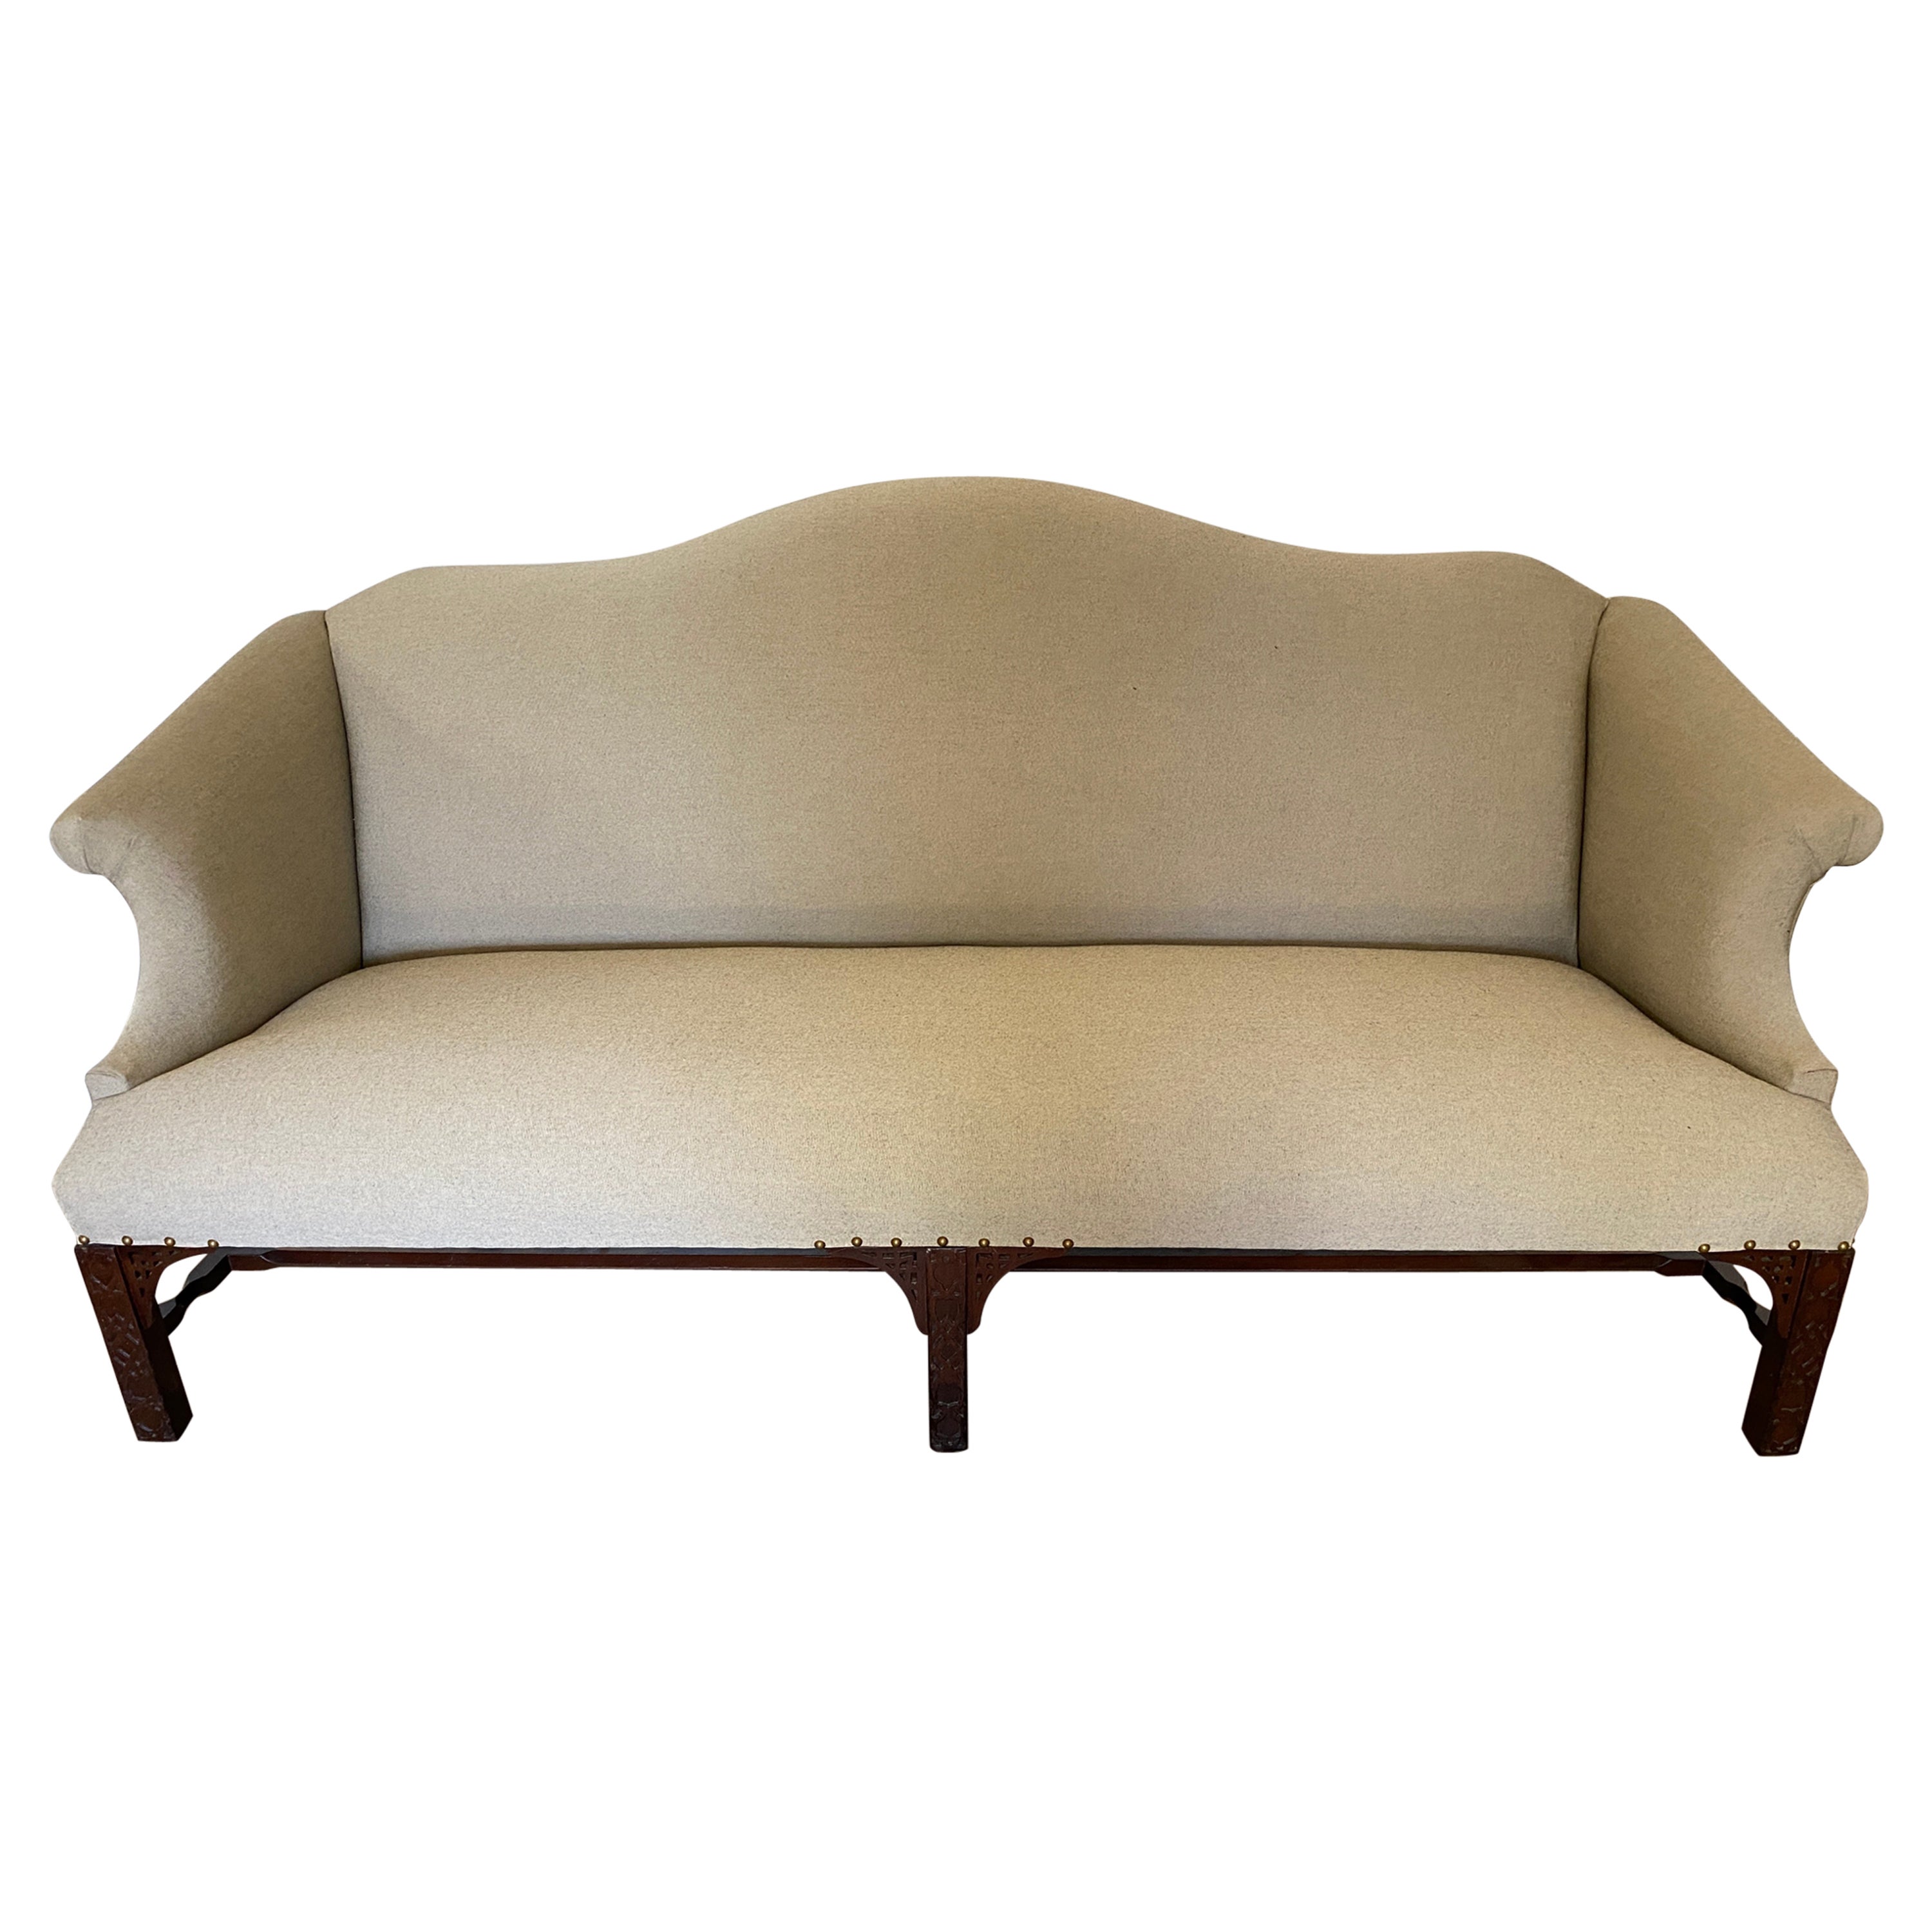 Chinese Chippendale Style Camelback Sofa For Sale